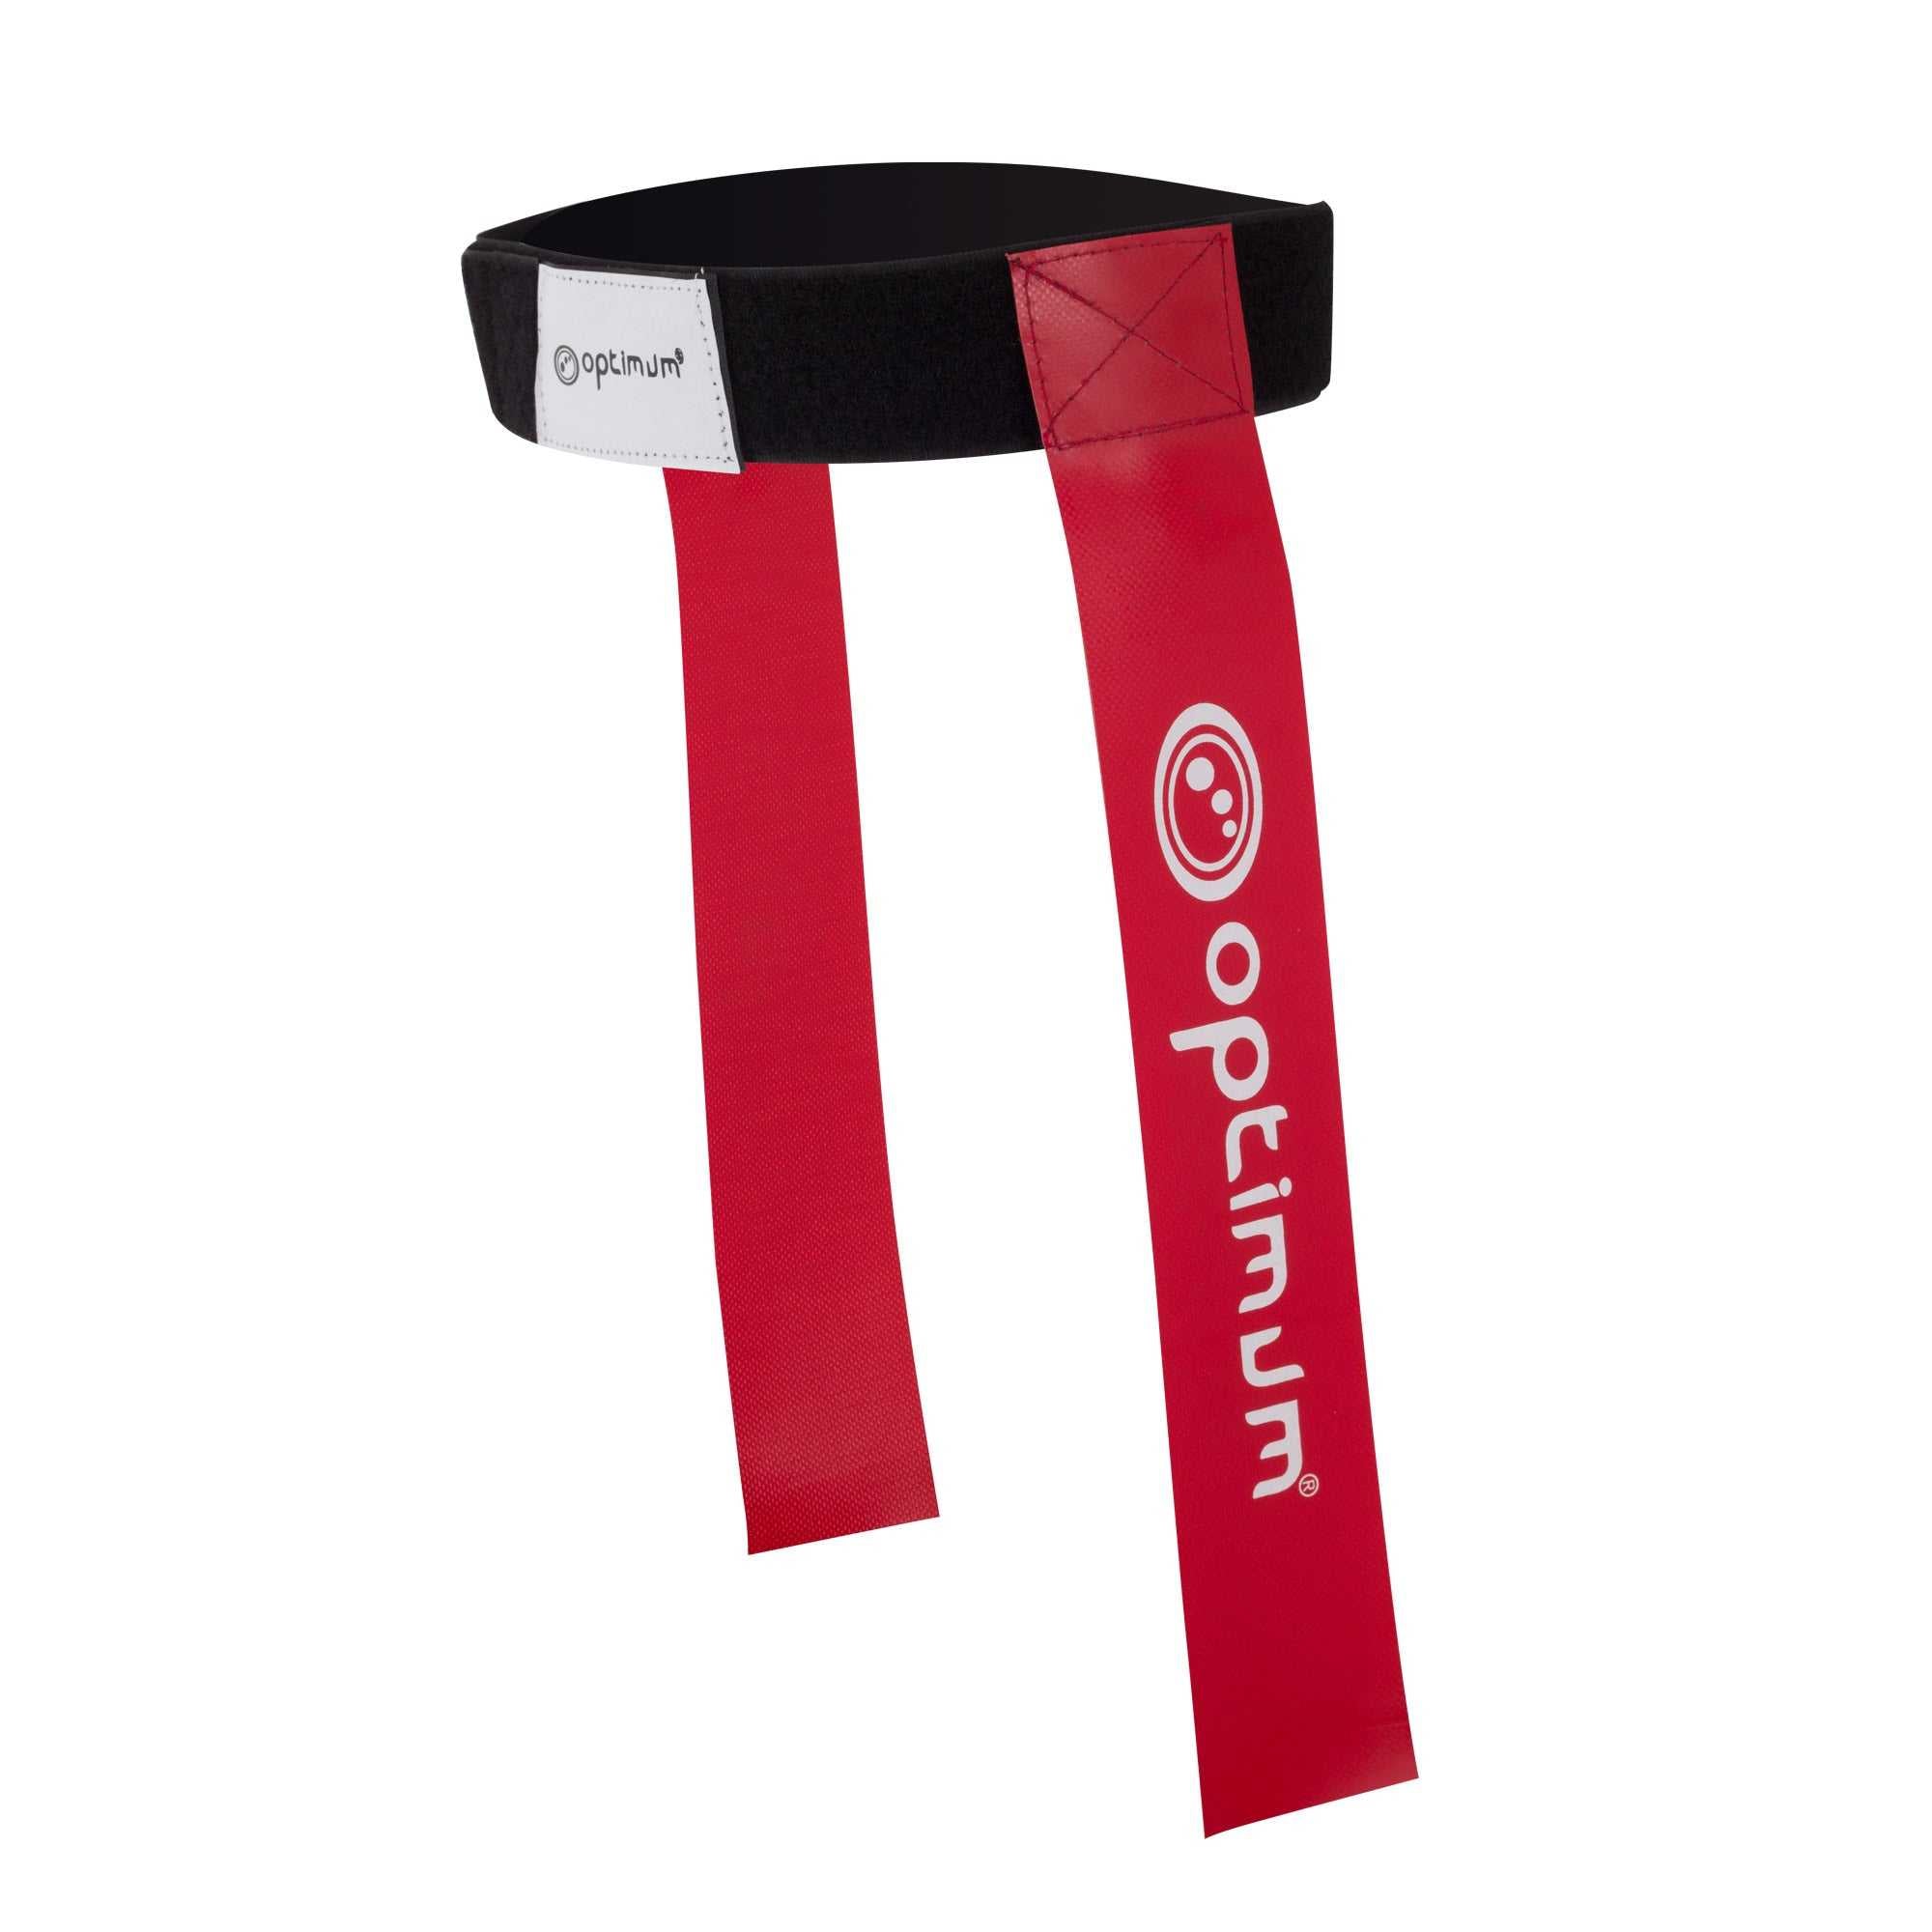 Red Tackle Belt & Flags Rugby Football Training Essentials - Optimum